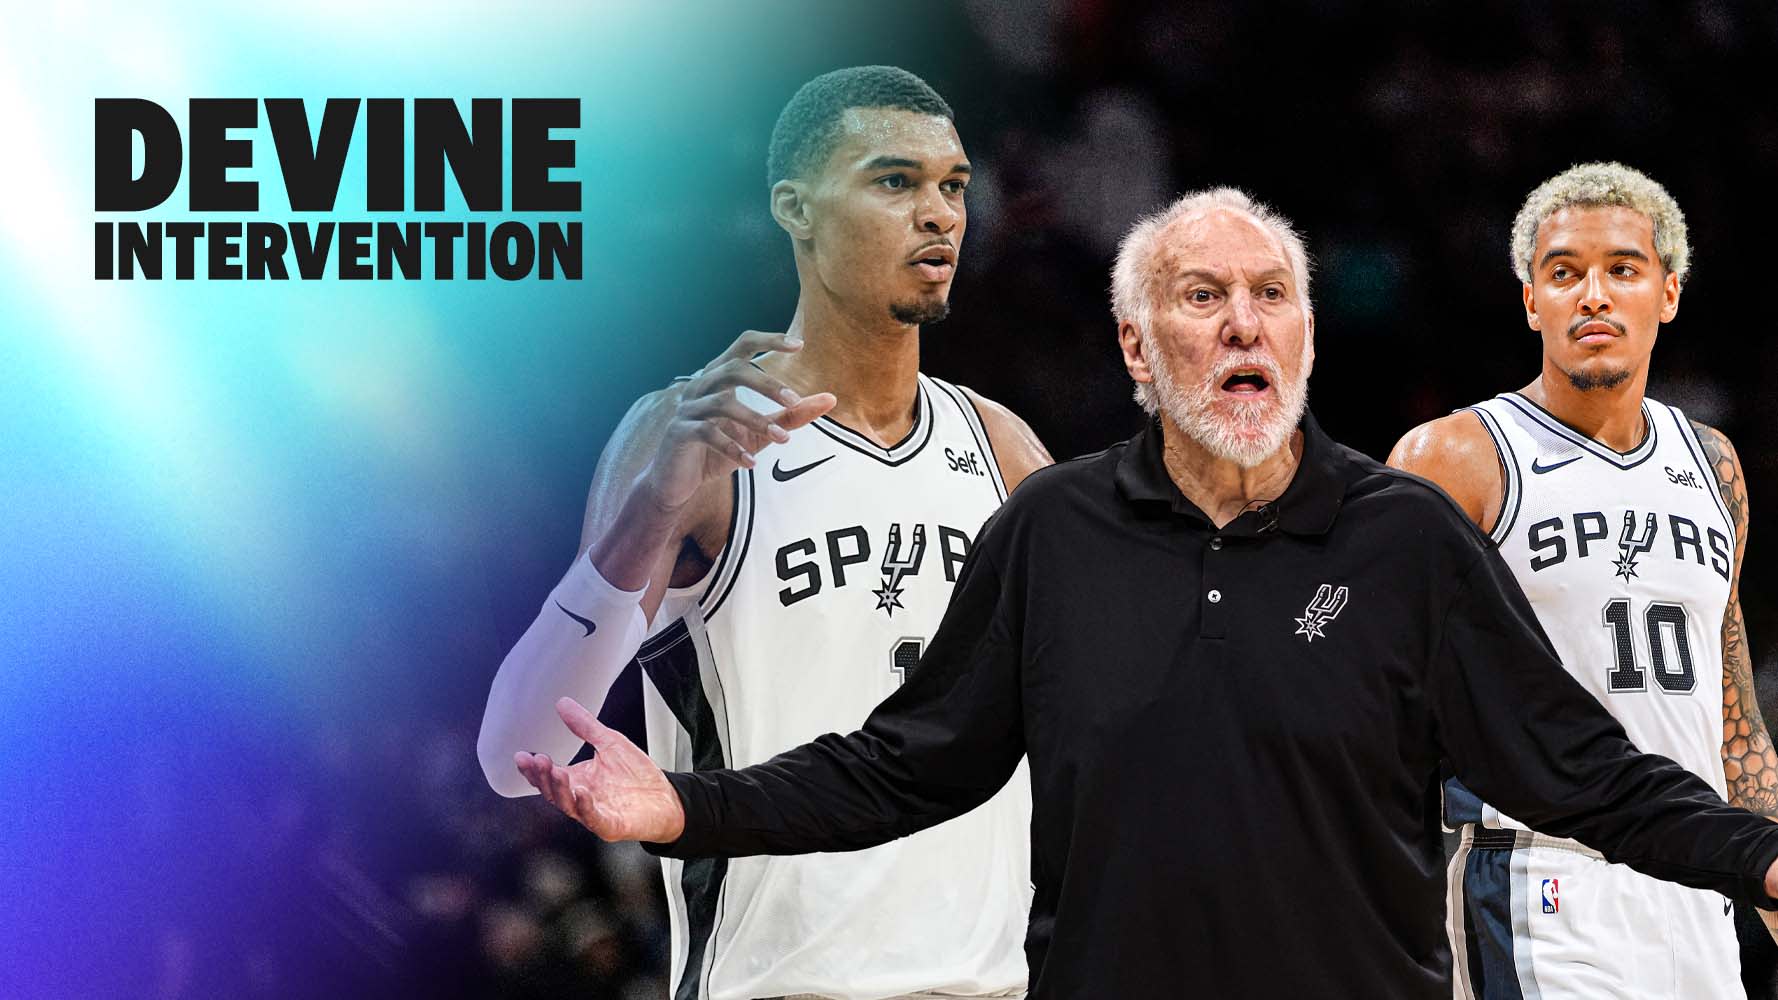 Should the Spurs ditch their ‘Giganto-ball’ lineup after just 3 games? | Devine Intervention